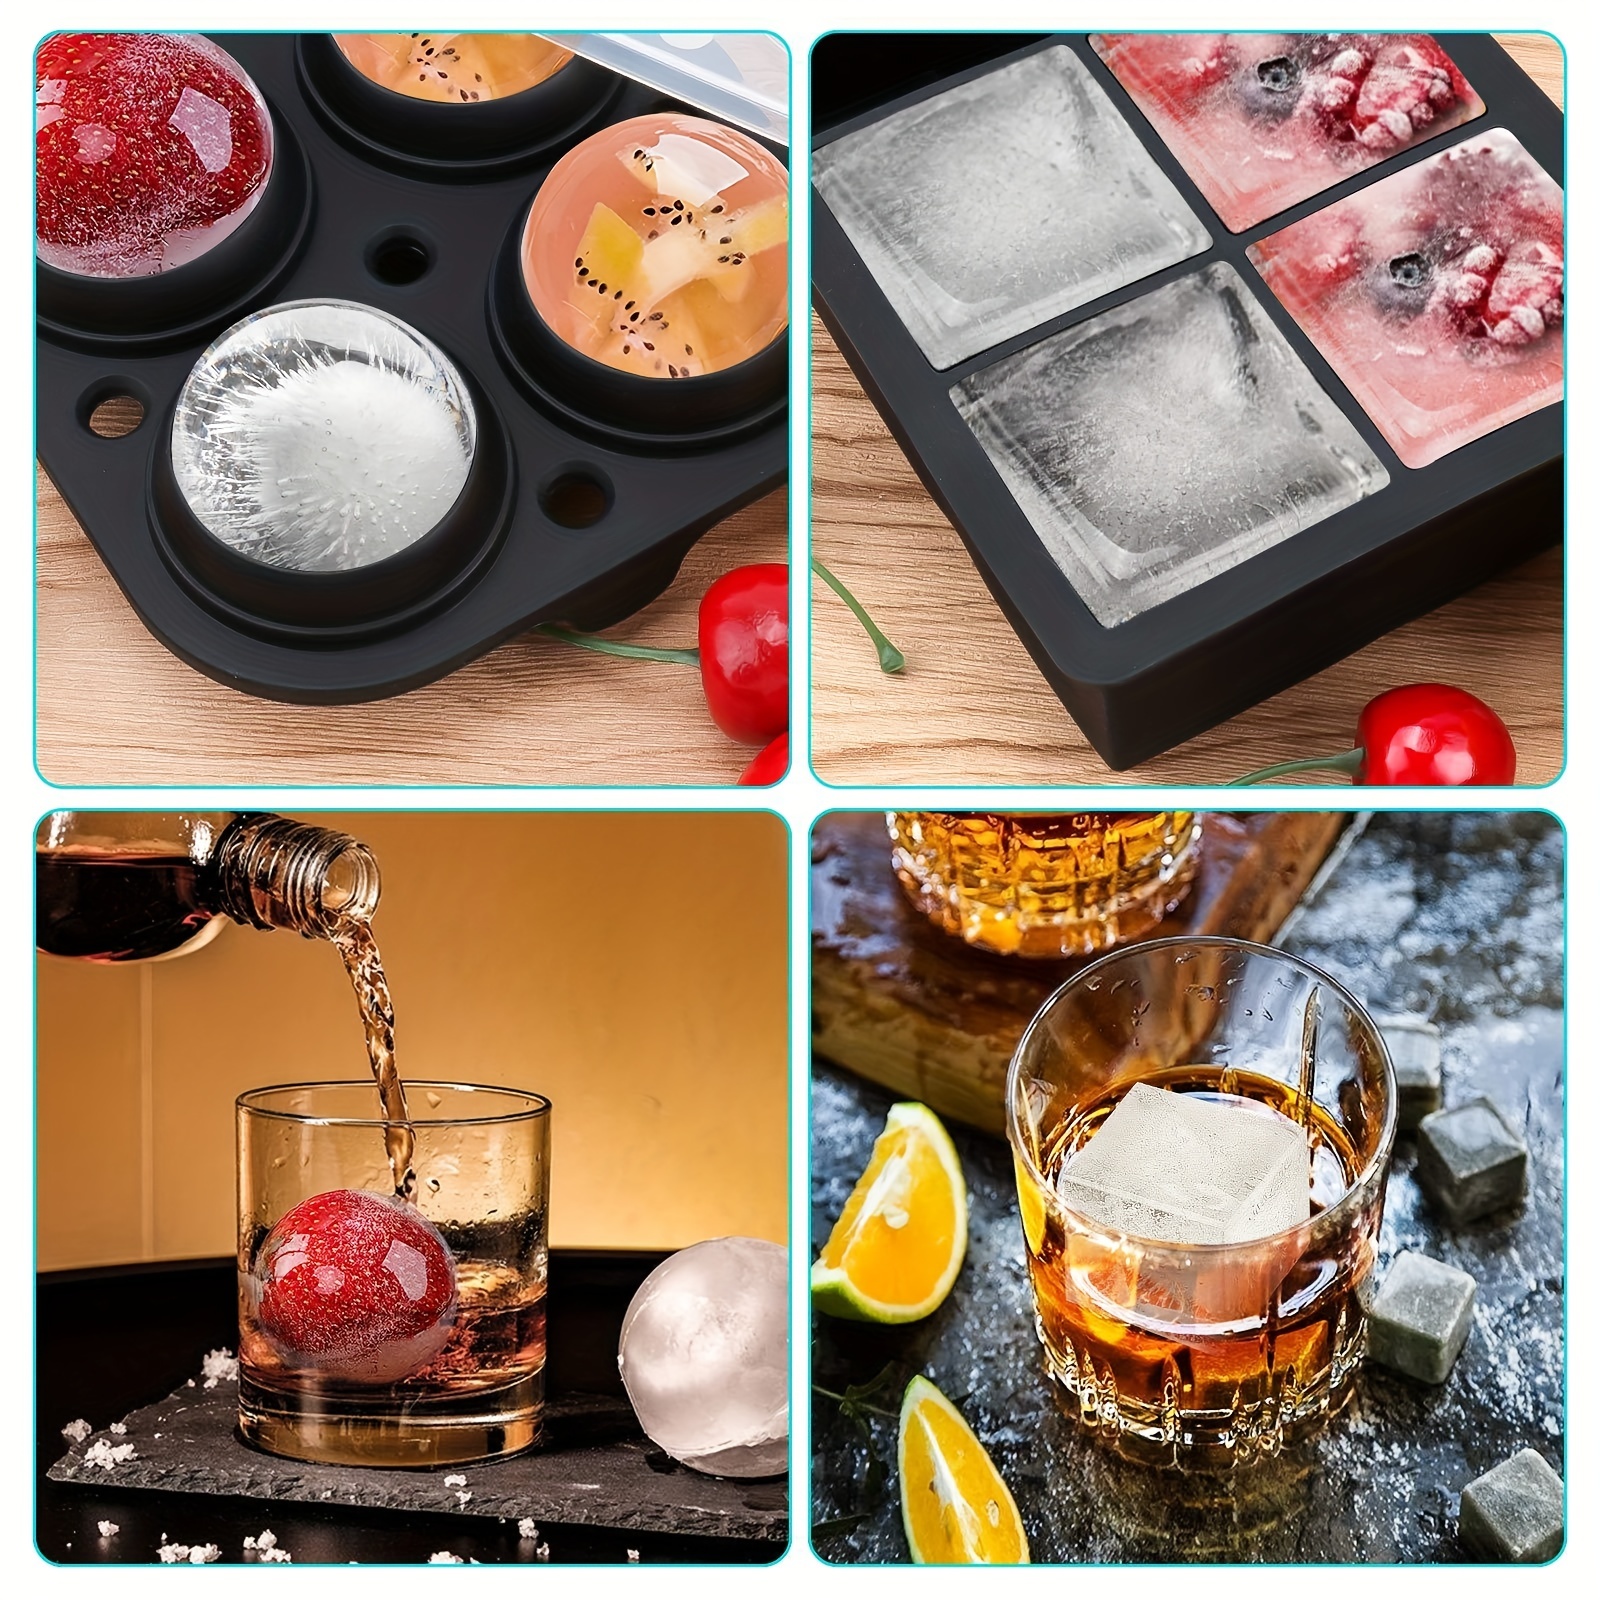 Ice Molds, Stackable Ice Molds, Whiskey Ice Ball Molds